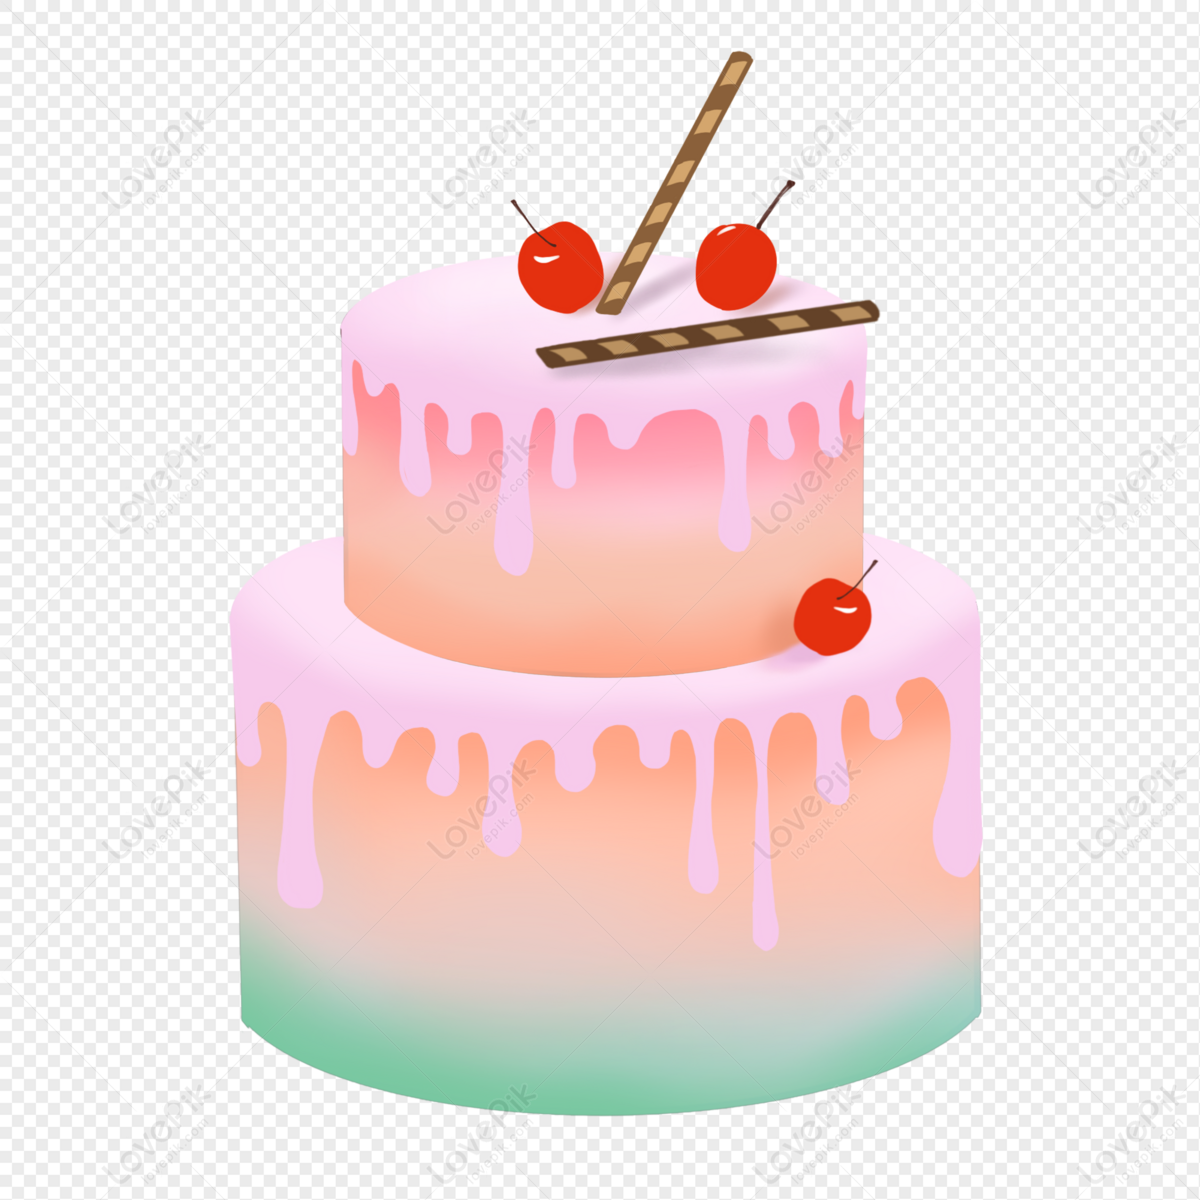 Hand Drawn Birthday Cake PNG Hd Transparent Image And Clipart ...